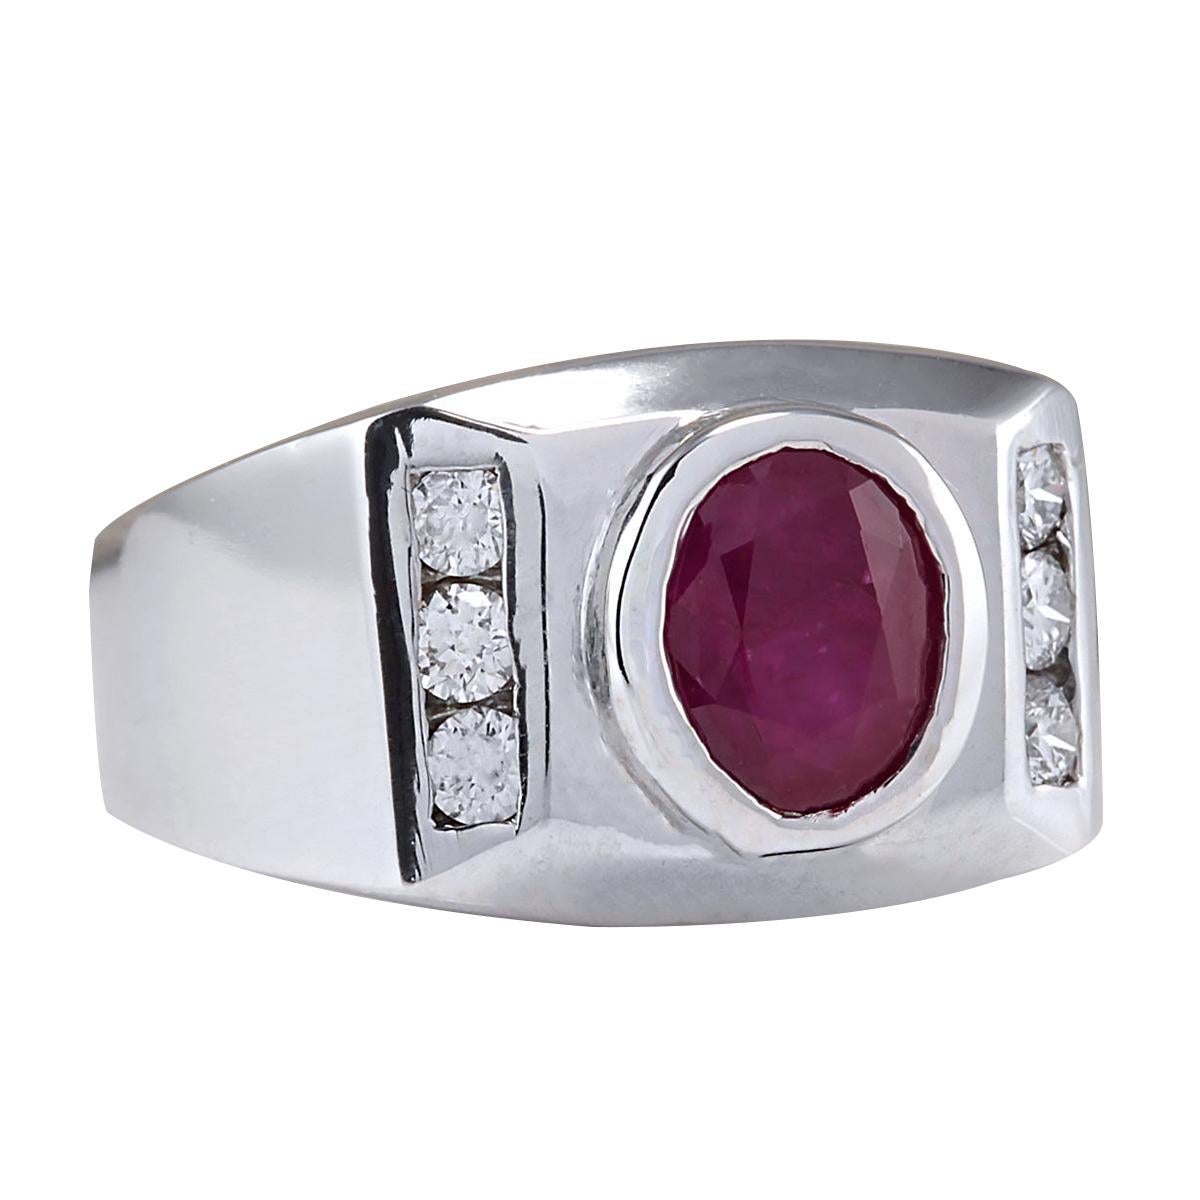 Stamped: 14K White Gold
Total Ring Weight: 14.0 Grams
Total Natural Ruby Weight is 3.27 Carat (Measures: 9.00x7.00 mm)
Color: Red
Total Natural Diamond Weight is 0.50 Carat
Color: F-G, Clarity: VS2-SI1
Face Measures: 13.10x18.60 mm
Sku: [702145W]